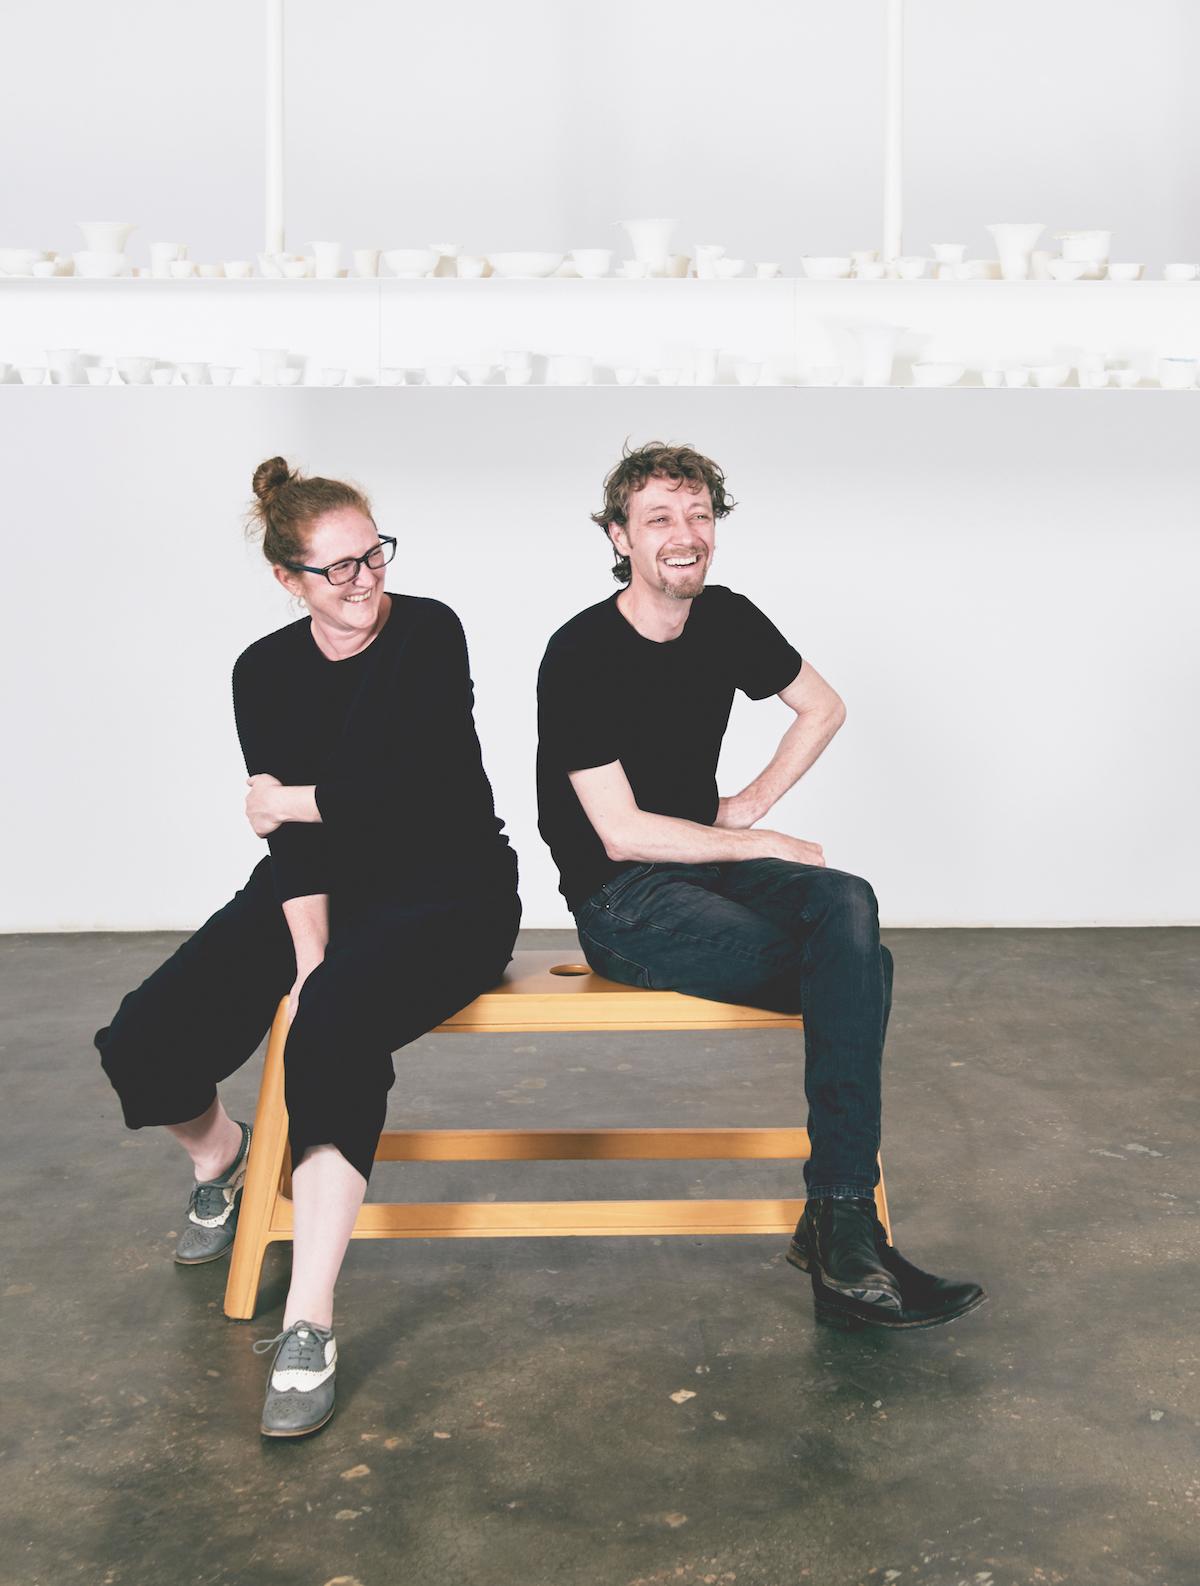 Dynamic Duo: Meet the Husband and Wife Behind Porcelain Brand Latitude 22N